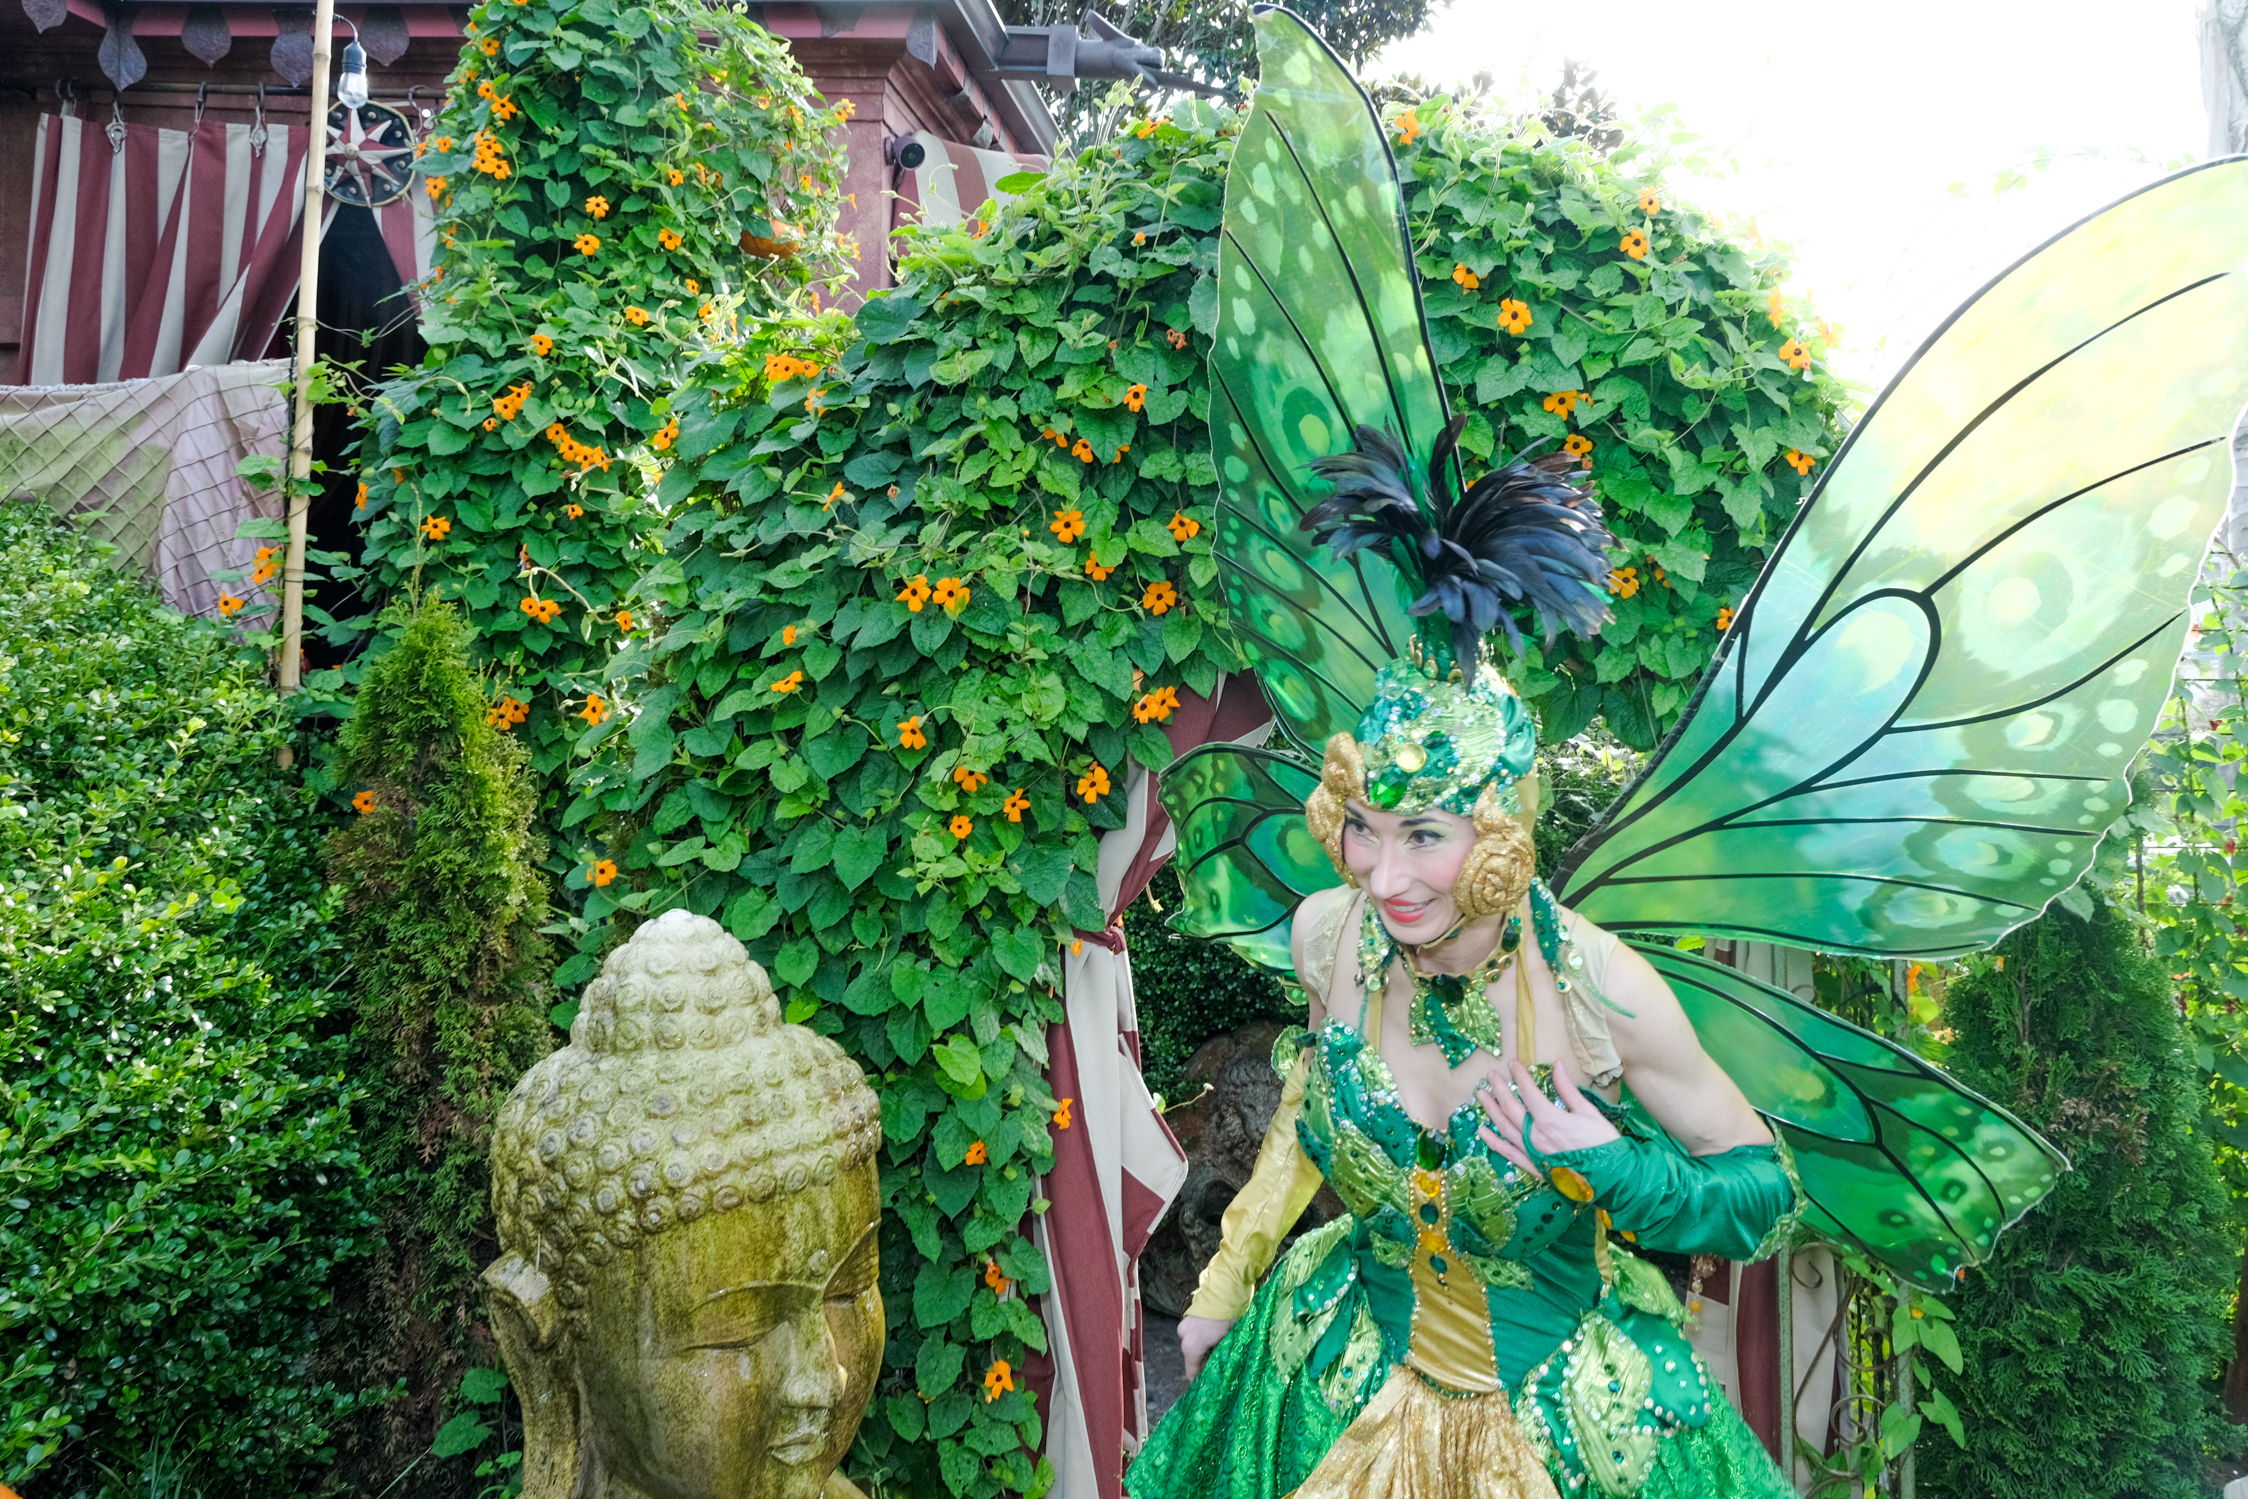 A person dressed as a vibrant green fairy with large wings, amidst lush greenery and orange flowers, next to a stone Buddha head.